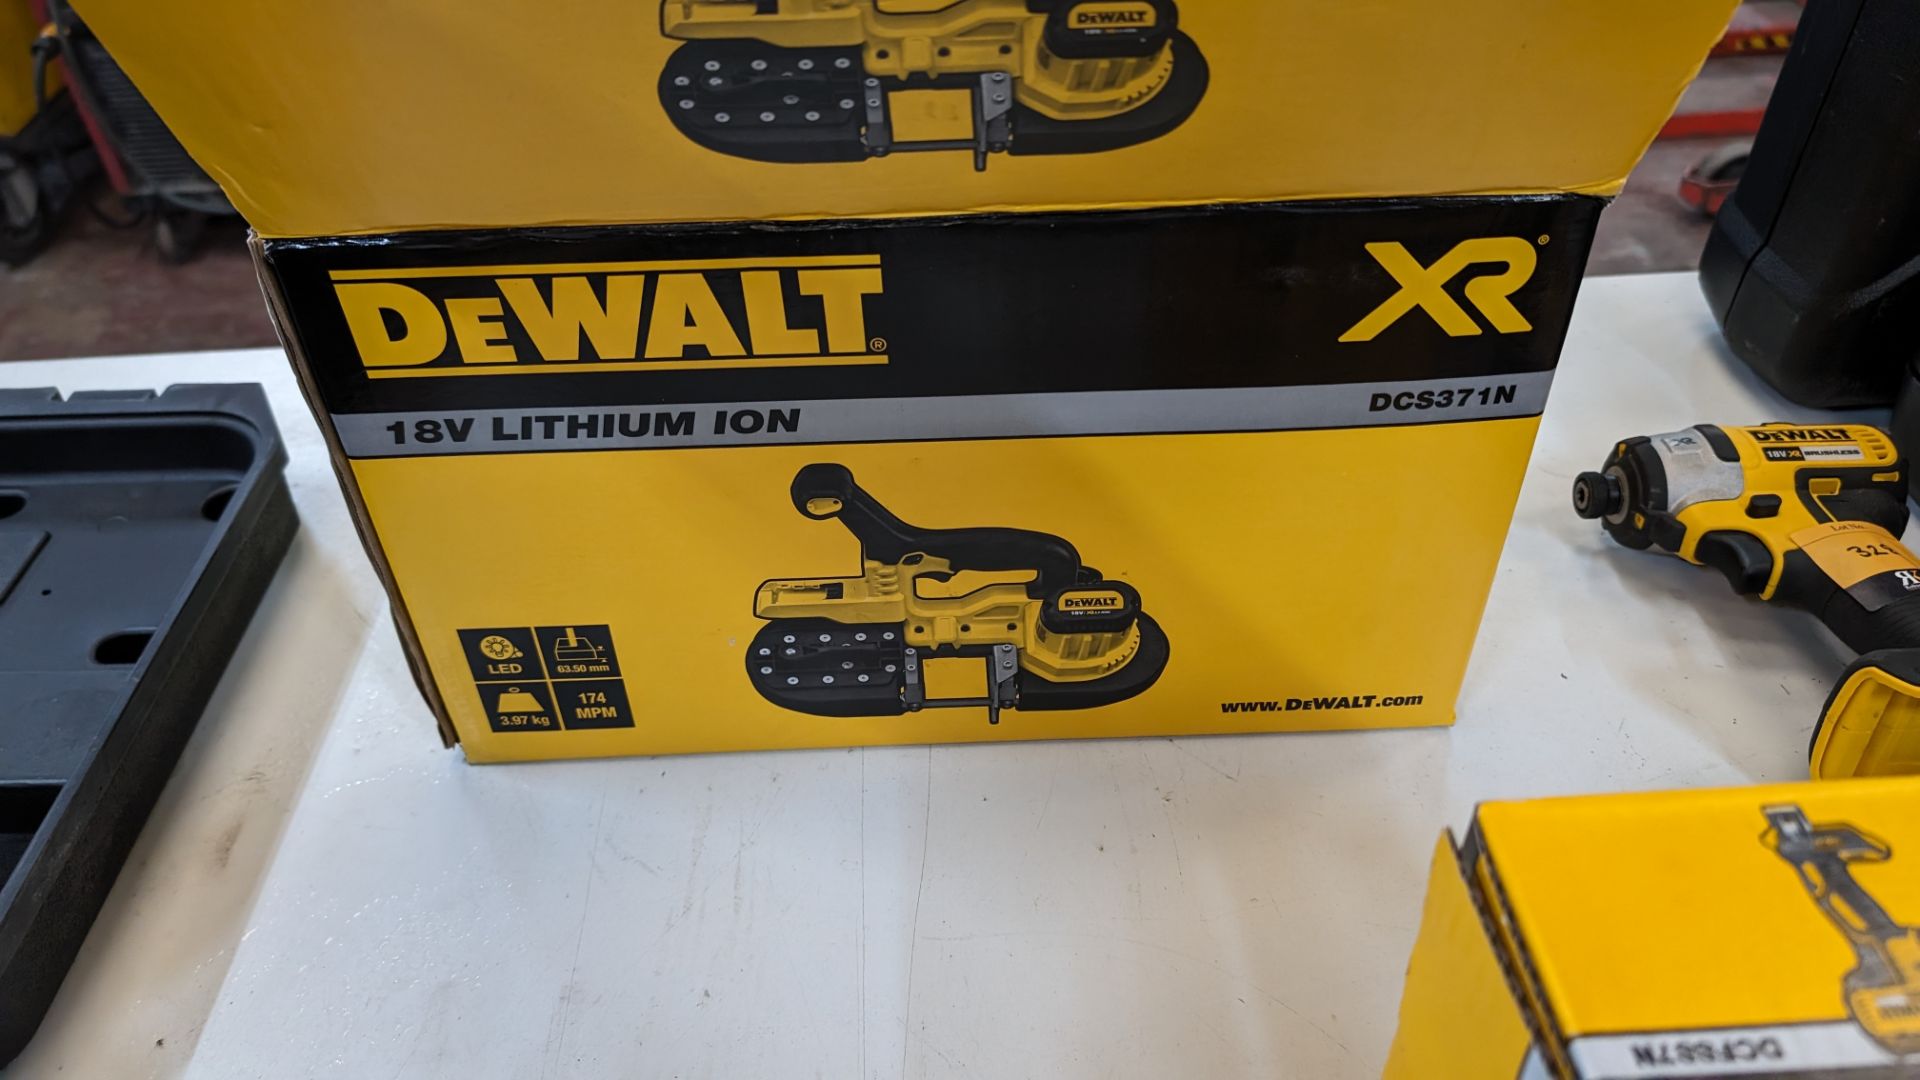 DeWalt XR model DCS371N cordless bandsaw. Bare unit, no battery or charger. Appears new & unused -